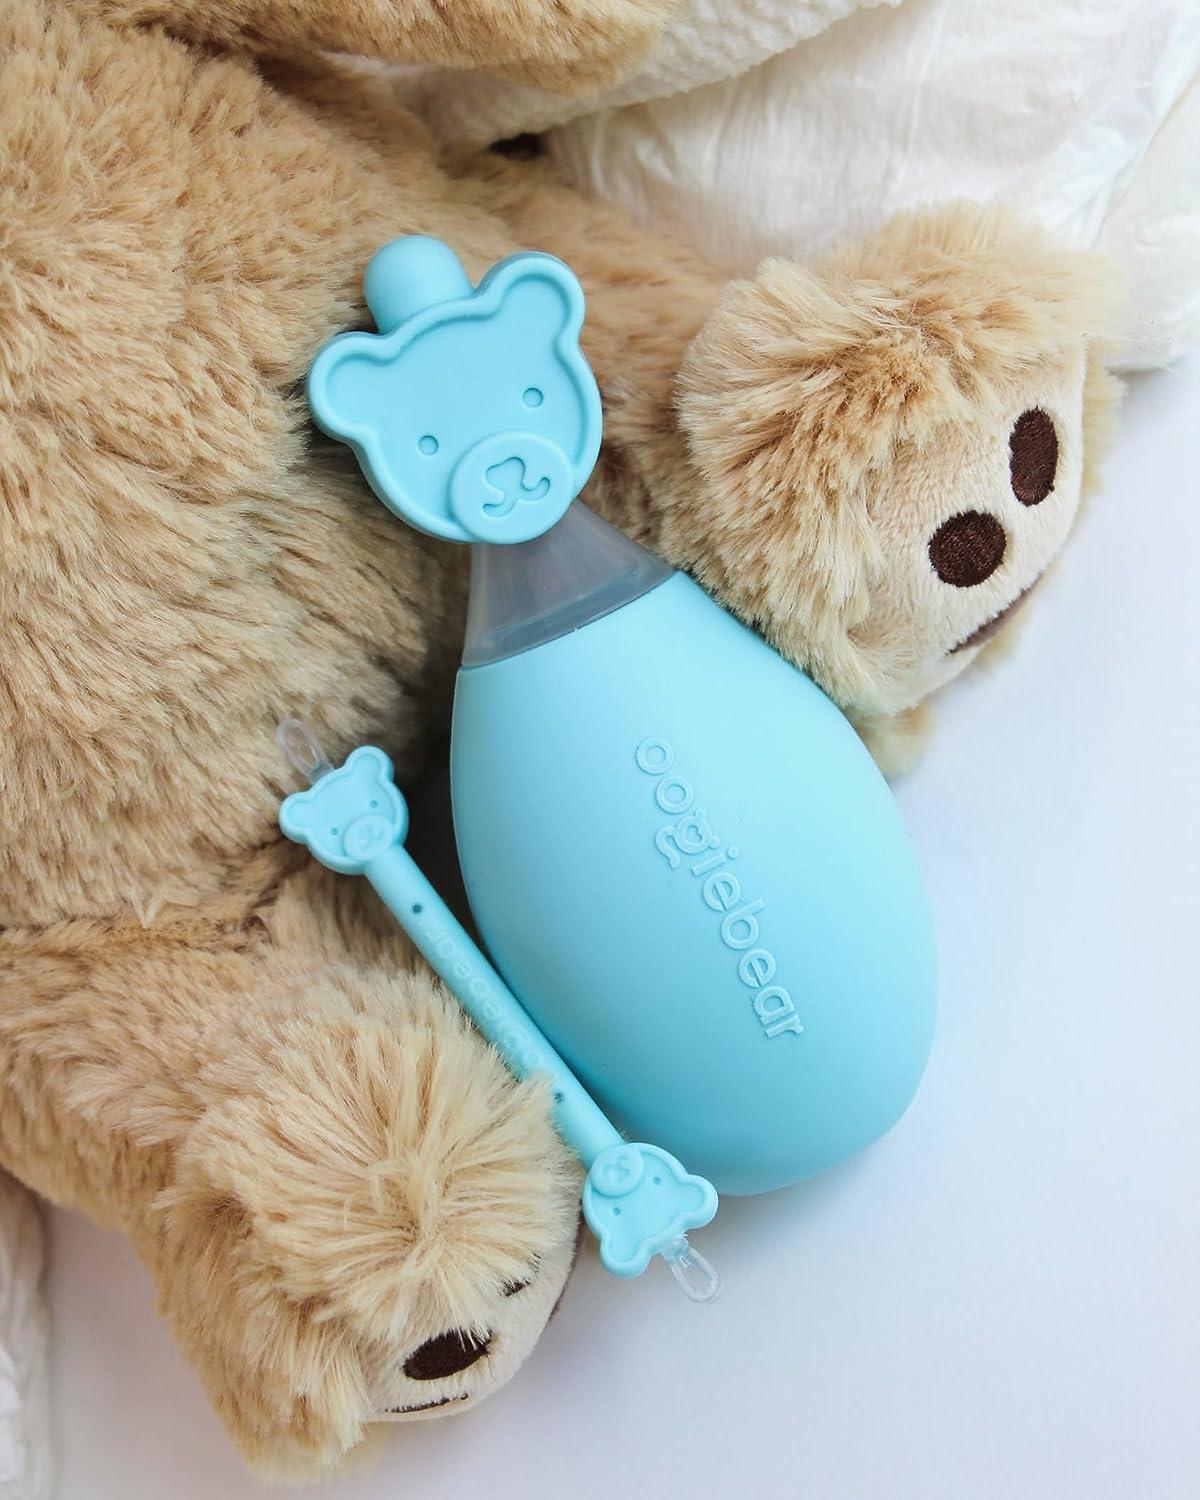 Oogiebear The Bear Pair Bulb Aspirator and Booger Picker in Blue